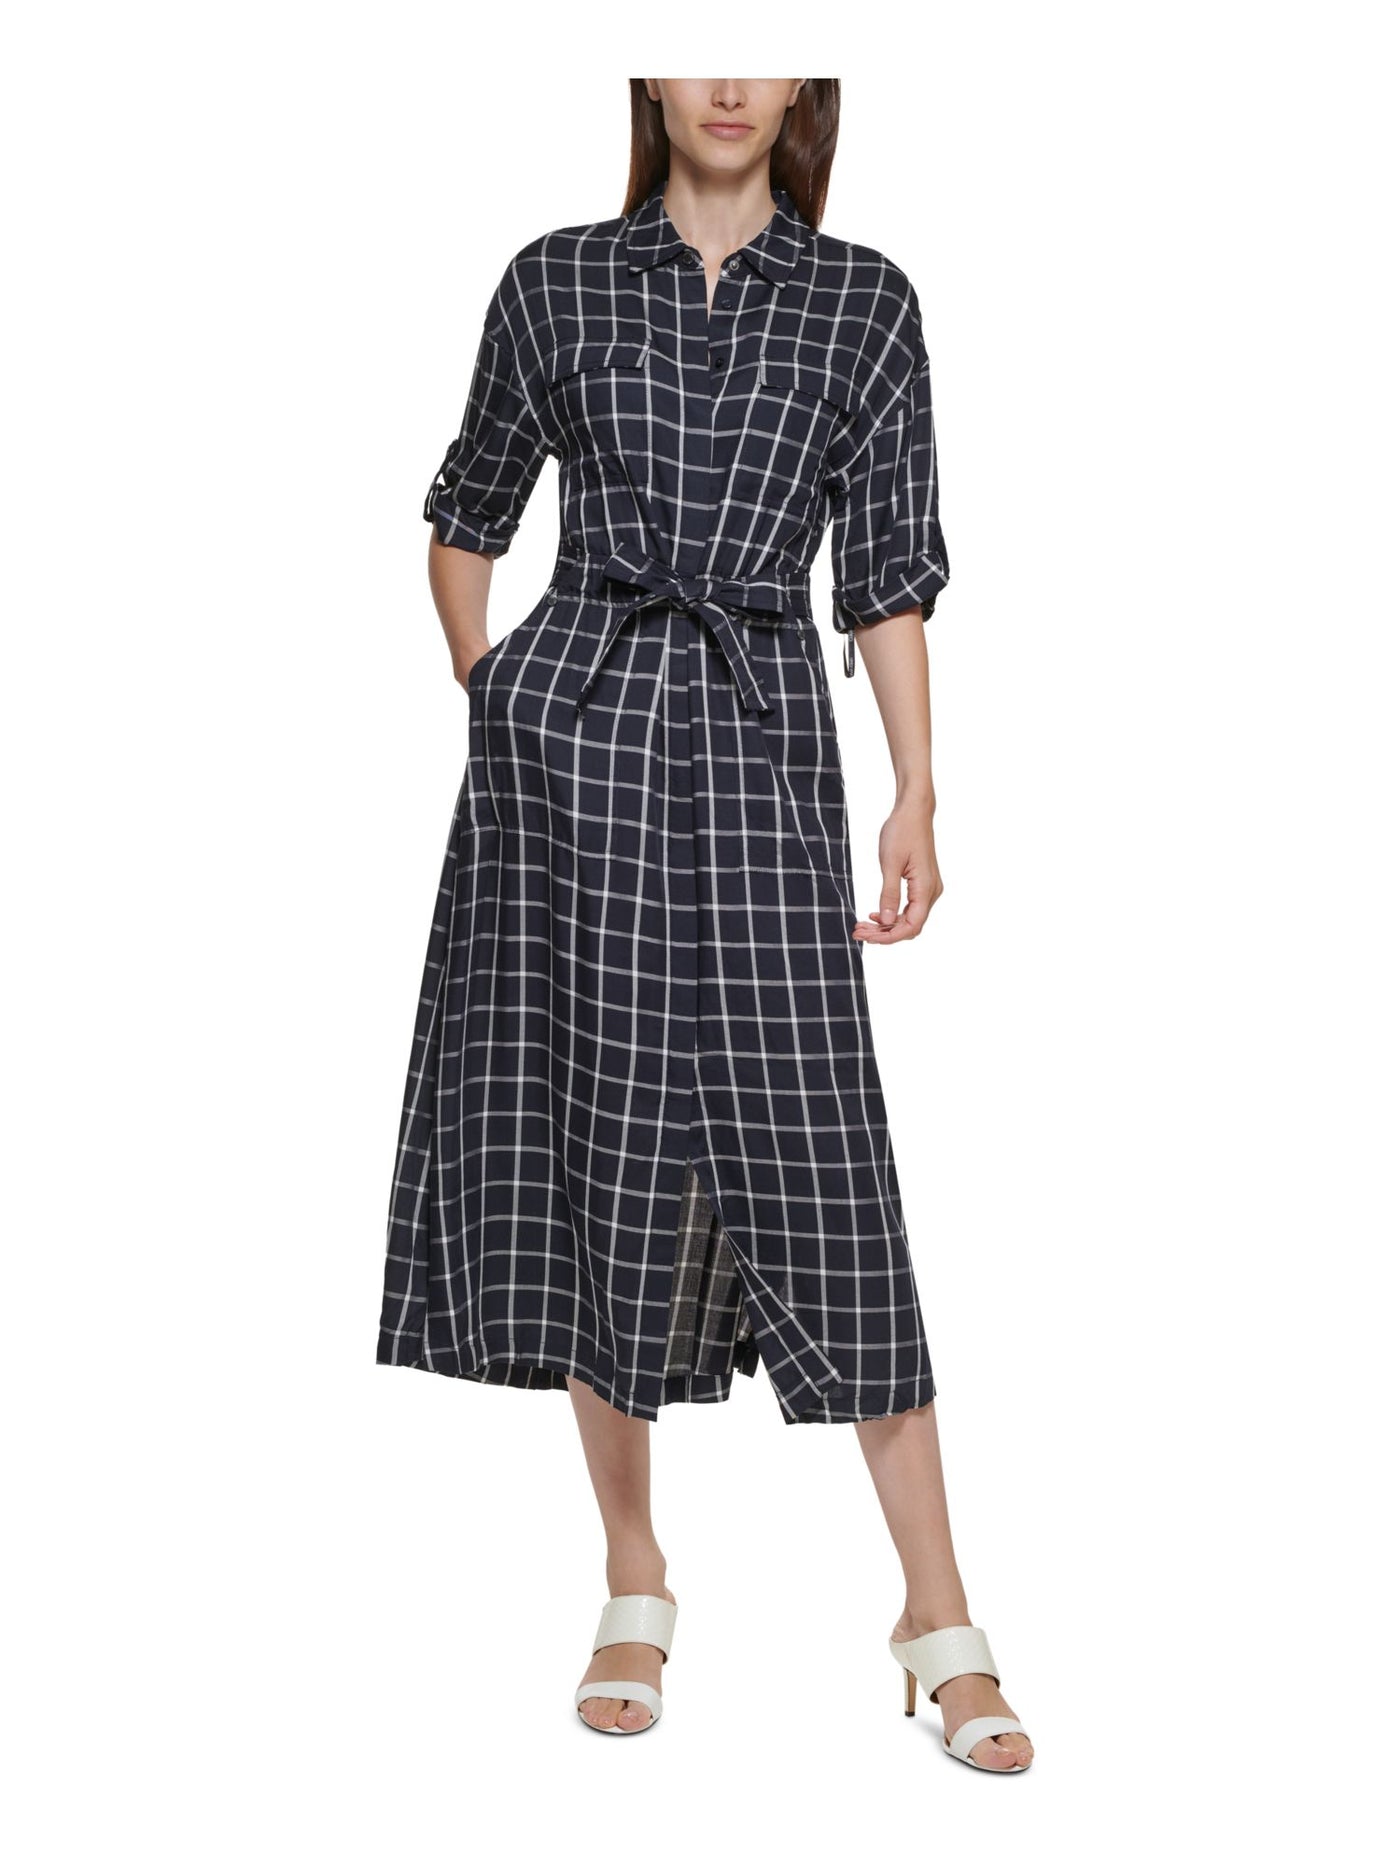 CALVIN KLEIN Womens Navy Tie Unlined Plaid Elbow Sleeve Collared Tea-Length Wear To Work Shift Dress 2